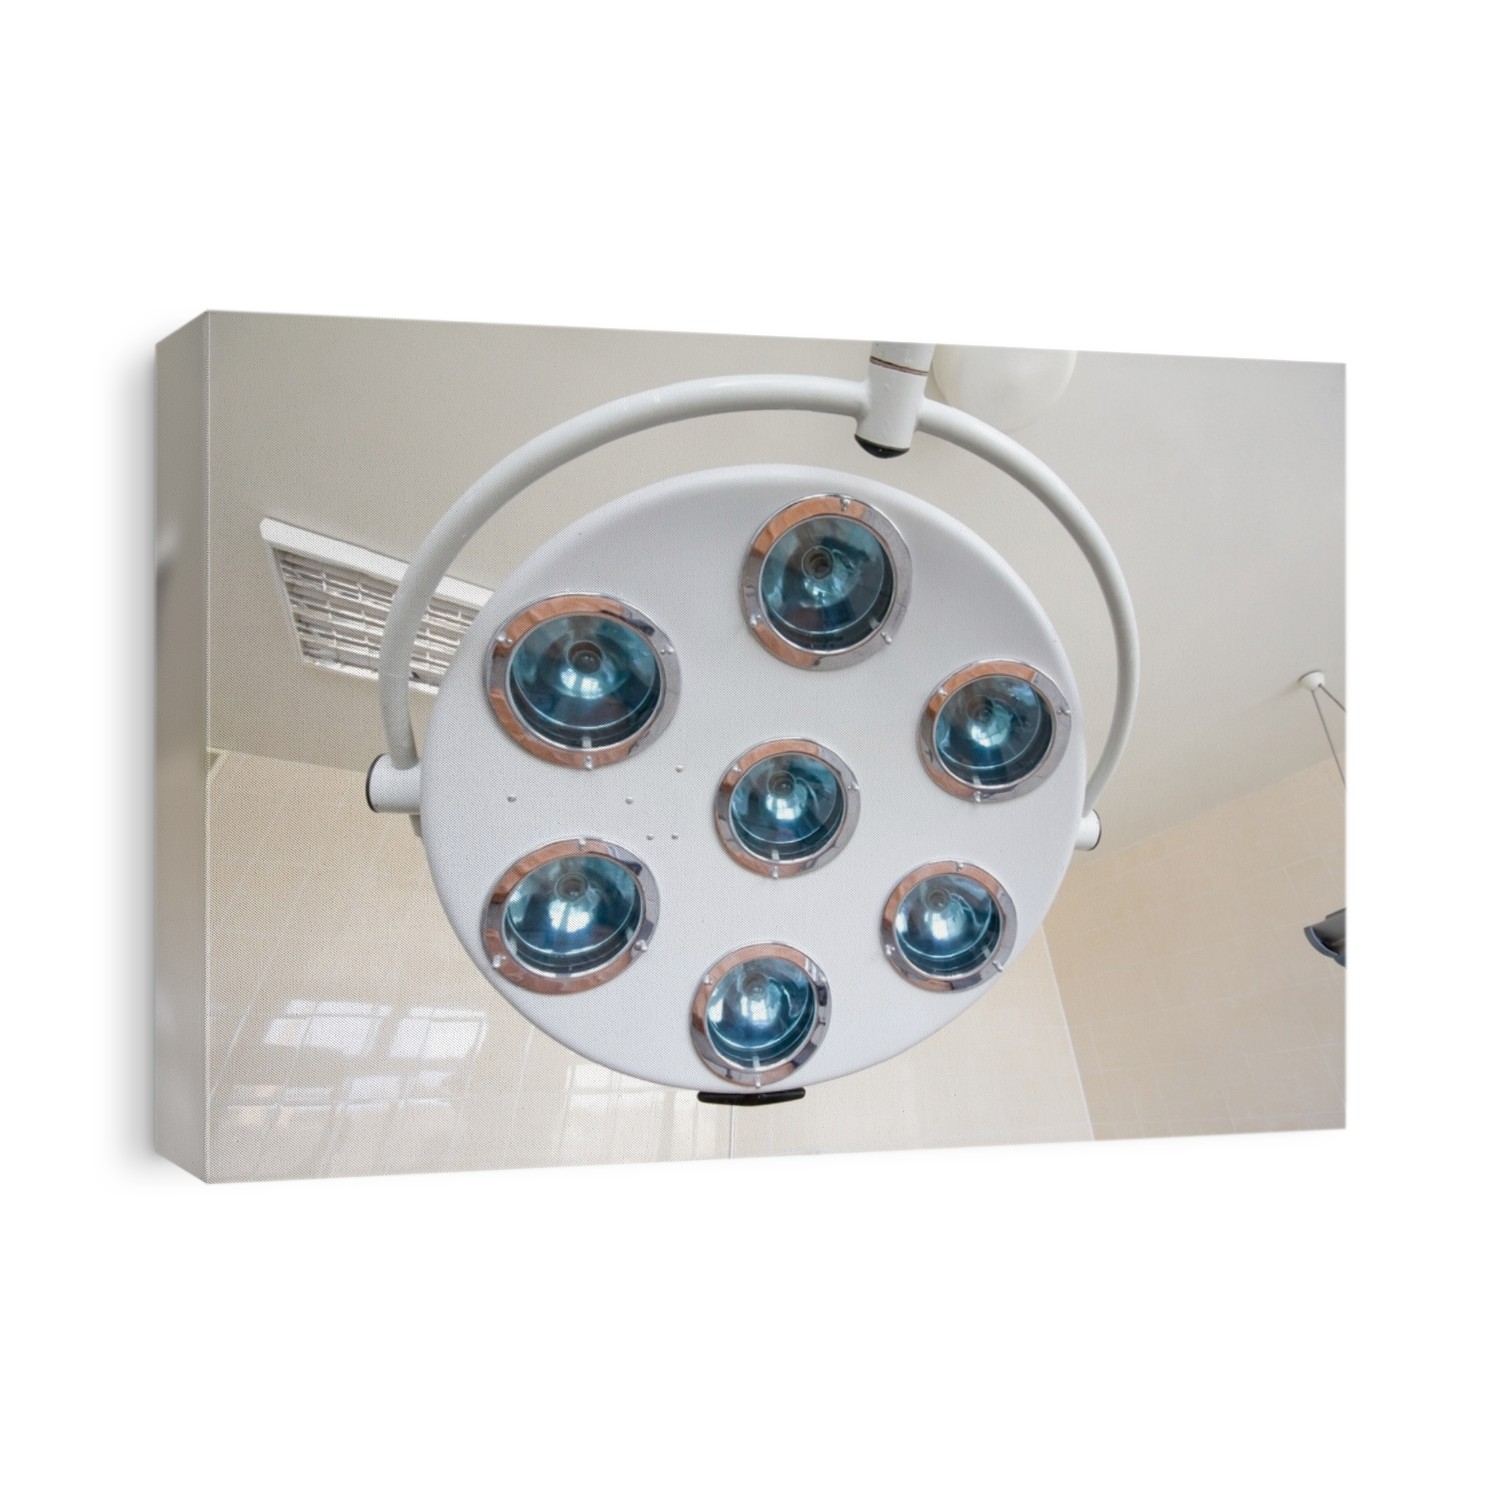 surgical lamp in operating-room